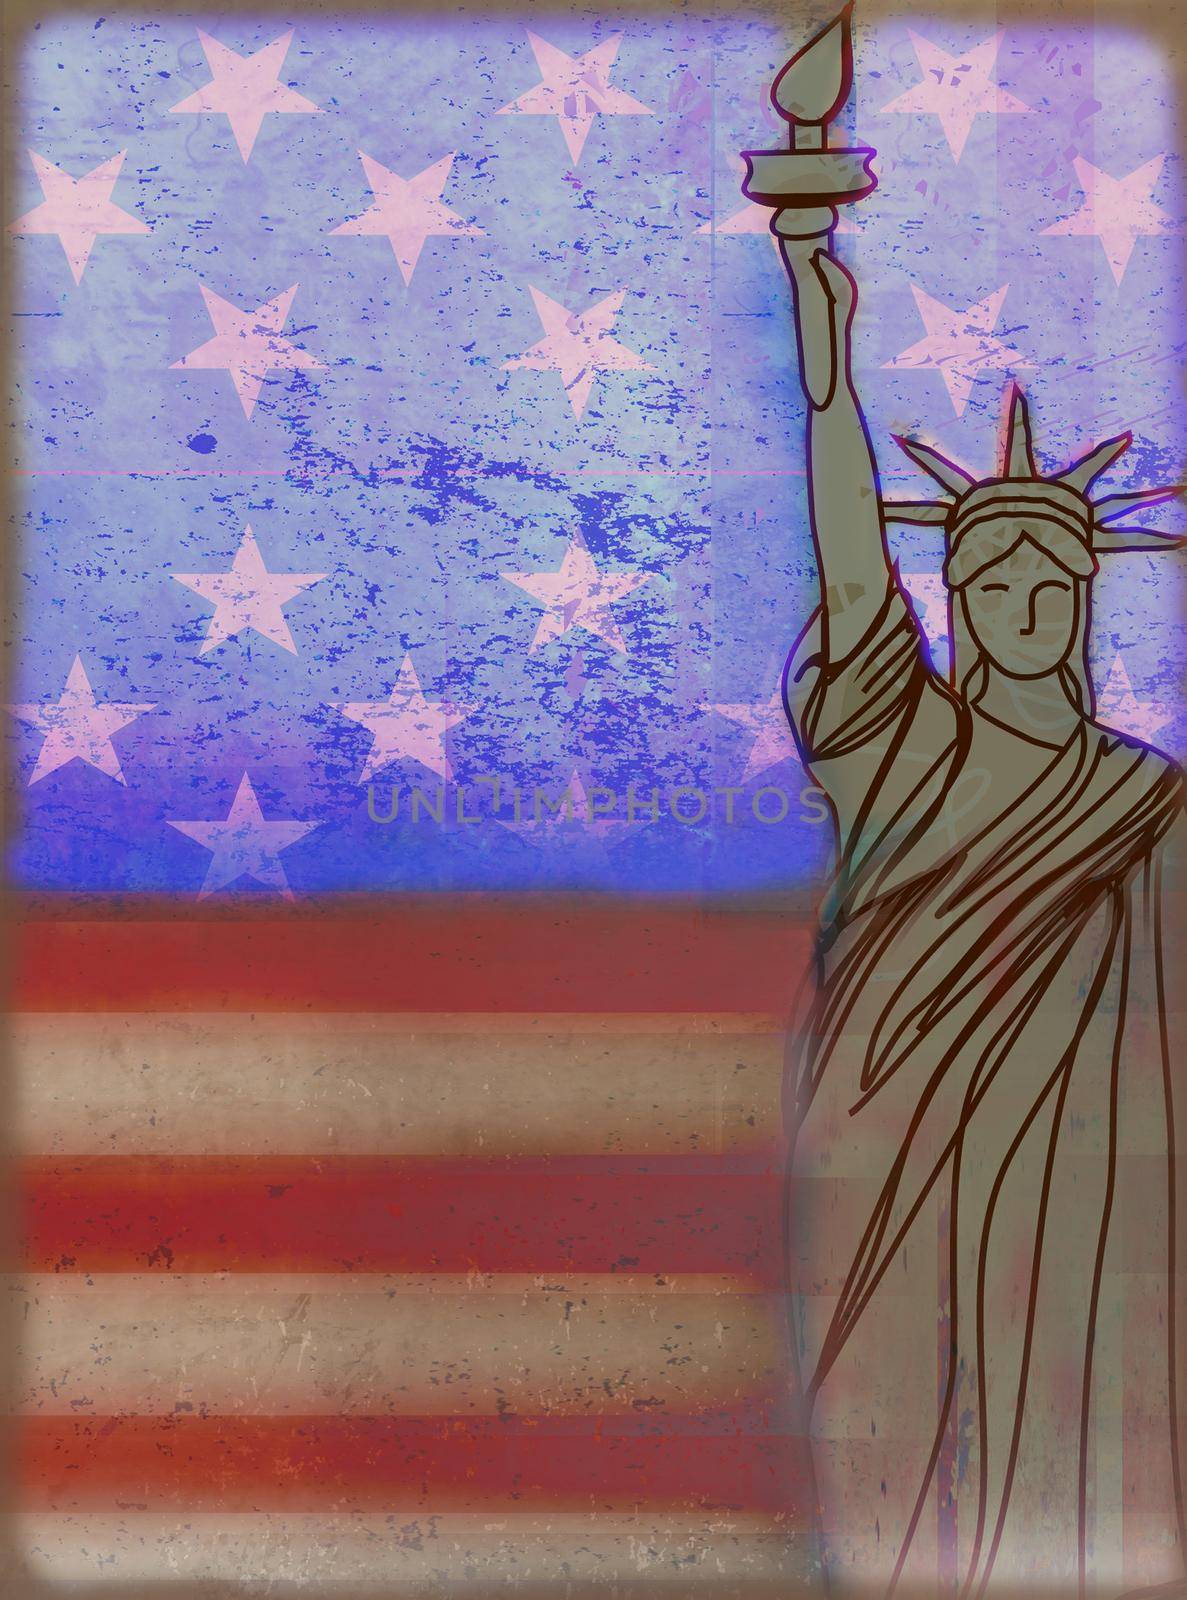 Grunge illustration of the american flag and Statue of liberty